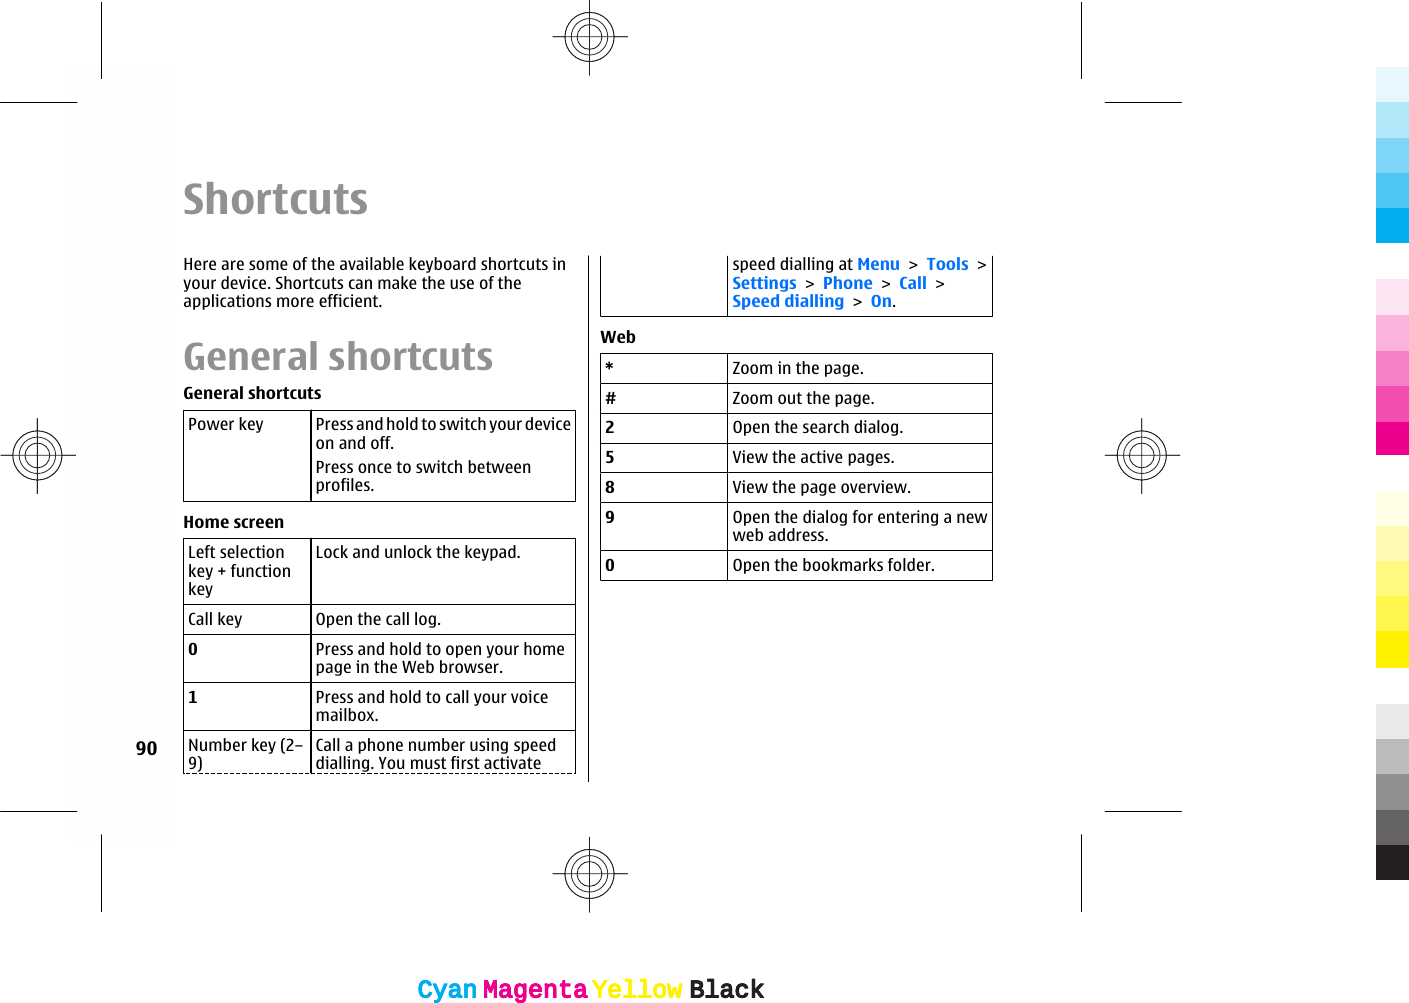 ShortcutsHere are some of the available keyboard shortcuts inyour device. Shortcuts can make the use of theapplications more efficient.General shortcutsGeneral shortcutsPower key Press and hold to switch your deviceon and off.Press once to switch betweenprofiles.Home screenLeft selectionkey + functionkeyLock and unlock the keypad.Call key Open the call log.0Press and hold to open your homepage in the Web browser.1Press and hold to call your voicemailbox.Number key (2–9)Call a phone number using speeddialling. You must first activatespeed dialling at Menu &gt; Tools &gt;Settings &gt; Phone &gt; Call &gt;Speed dialling &gt; On.Web*Zoom in the page.#Zoom out the page.2Open the search dialog.5View the active pages.8View the page overview.9Open the dialog for entering a newweb address.0Open the bookmarks folder.90CyanCyanMagentaMagentaYellowYellowBlackBlackCyanCyanMagentaMagentaYellowYellowBlackBlack